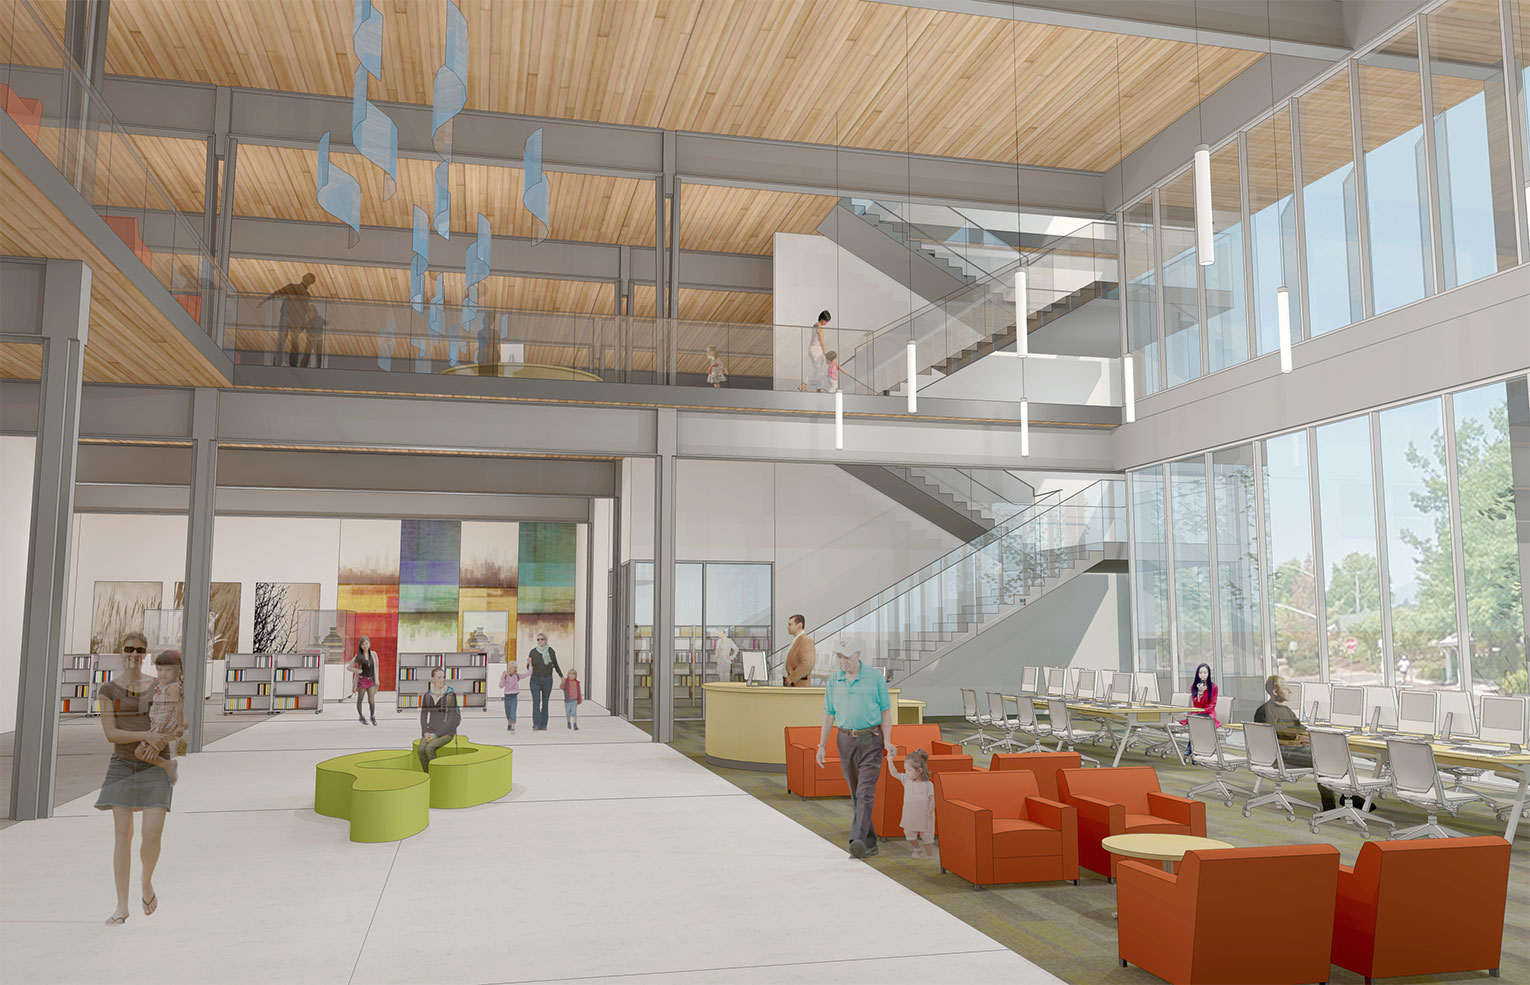 Springfield Public Library Study. Renderning of a library's double-height reading room featuring library patrons, rich orange and green upholstered seating, and an open staircase with walkway above the main floor.